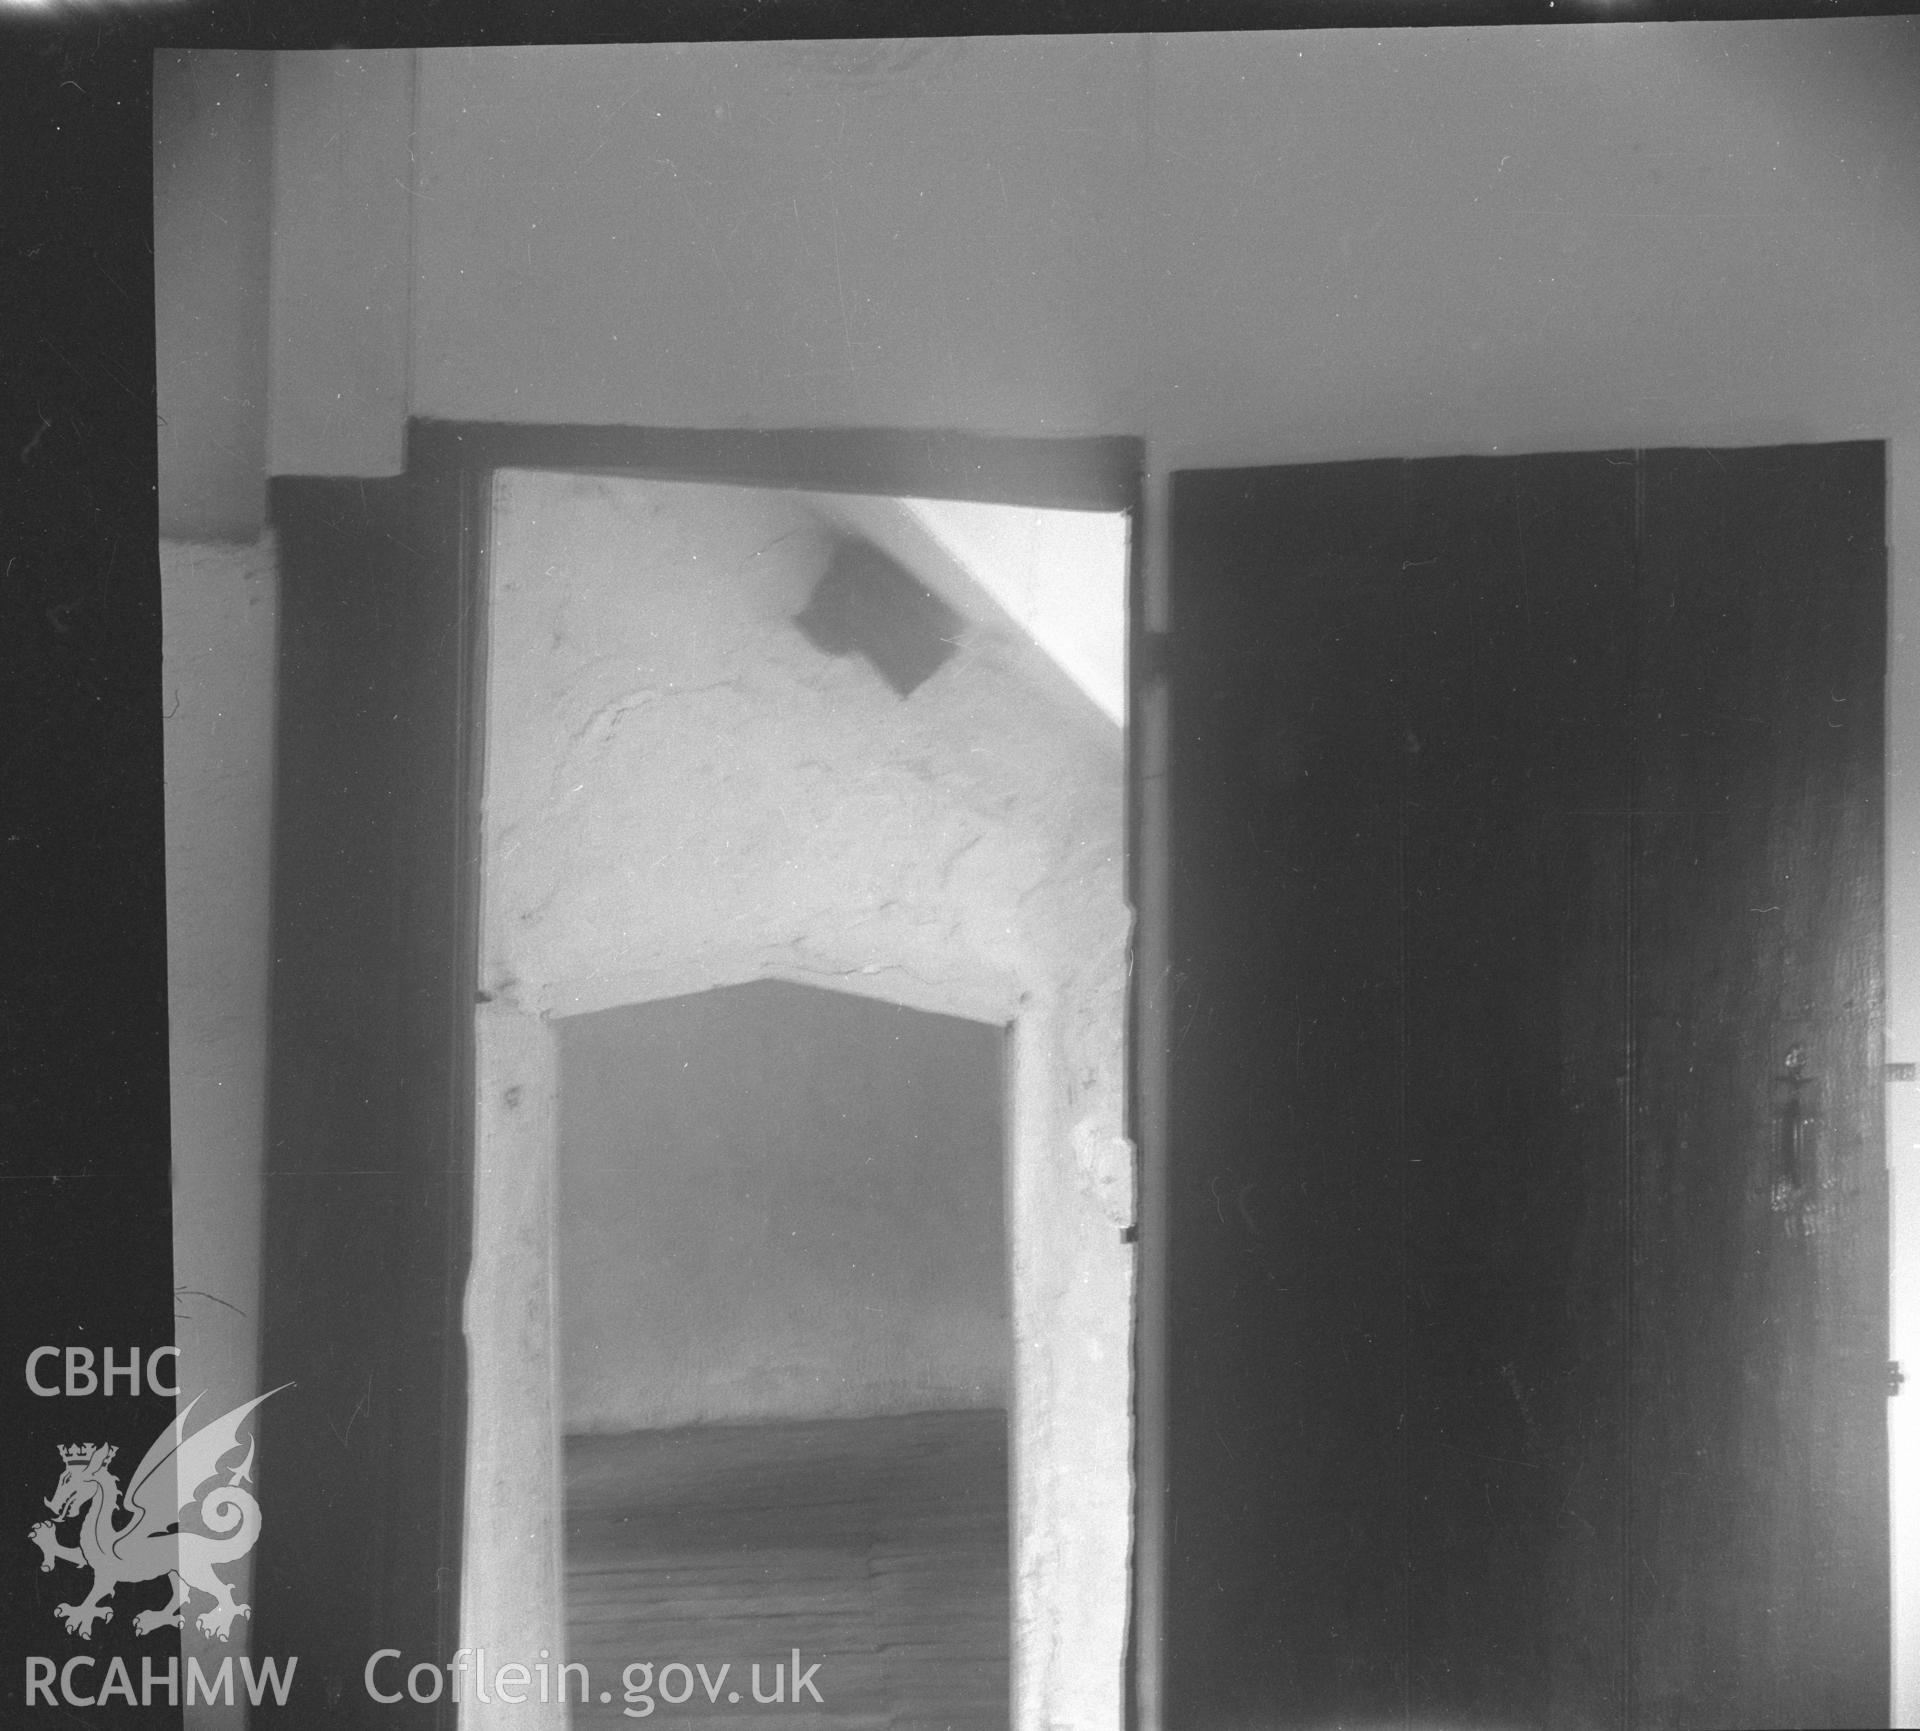 Black and white acetate negative showing interior detail of doorframe, Brithdir-Mawr, Cilcain.